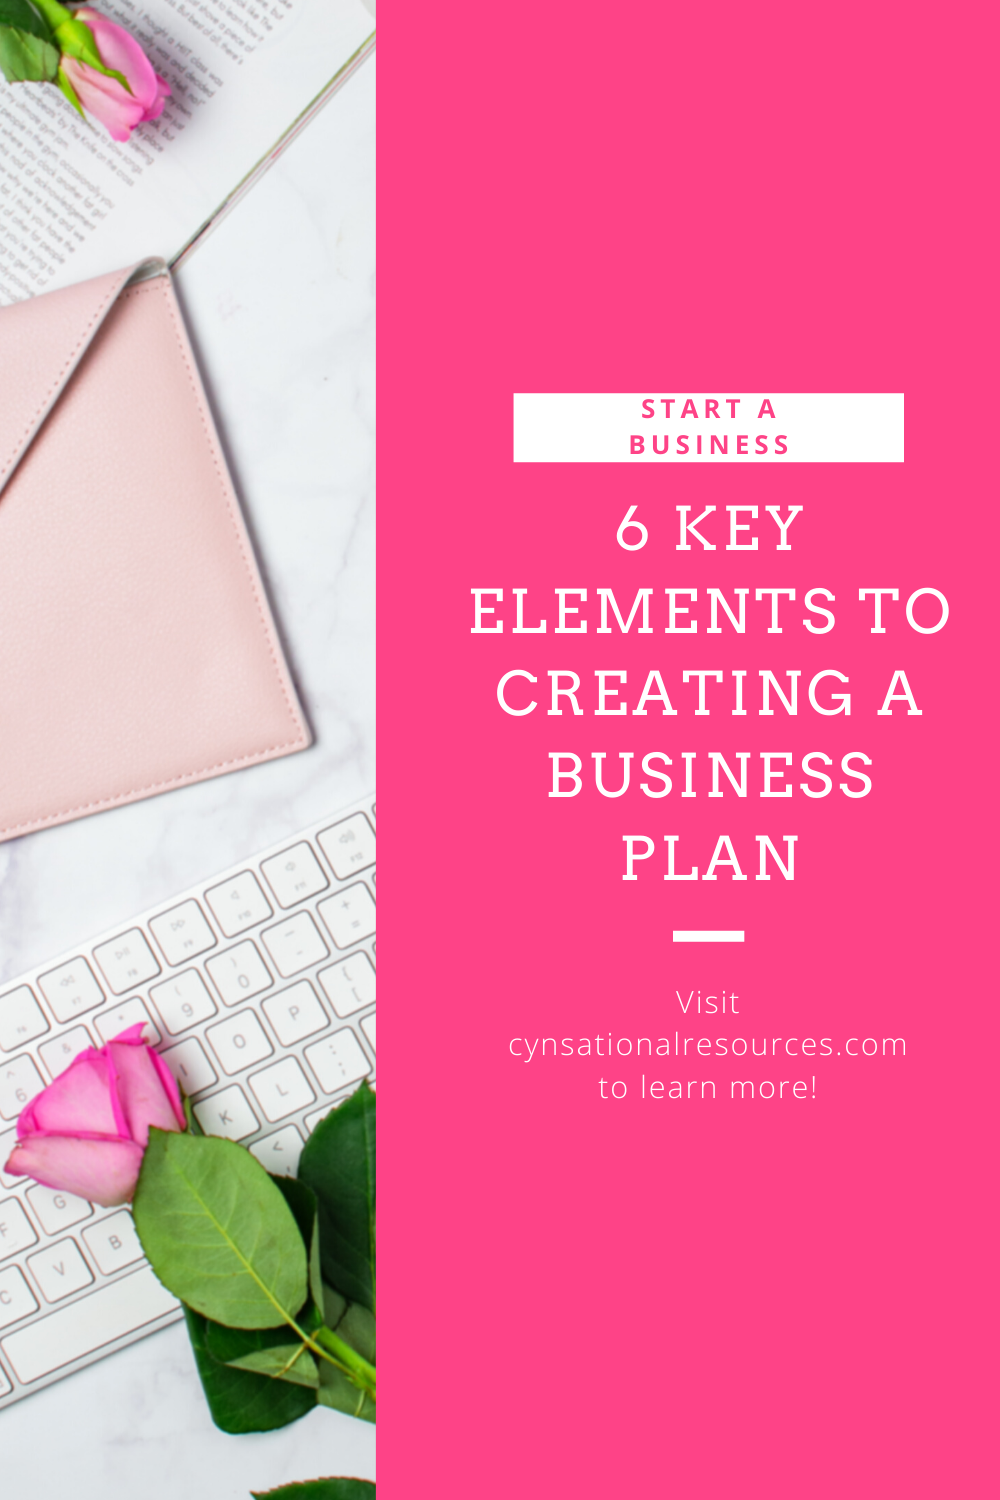 6 Key Elements to Creating a Business Plan